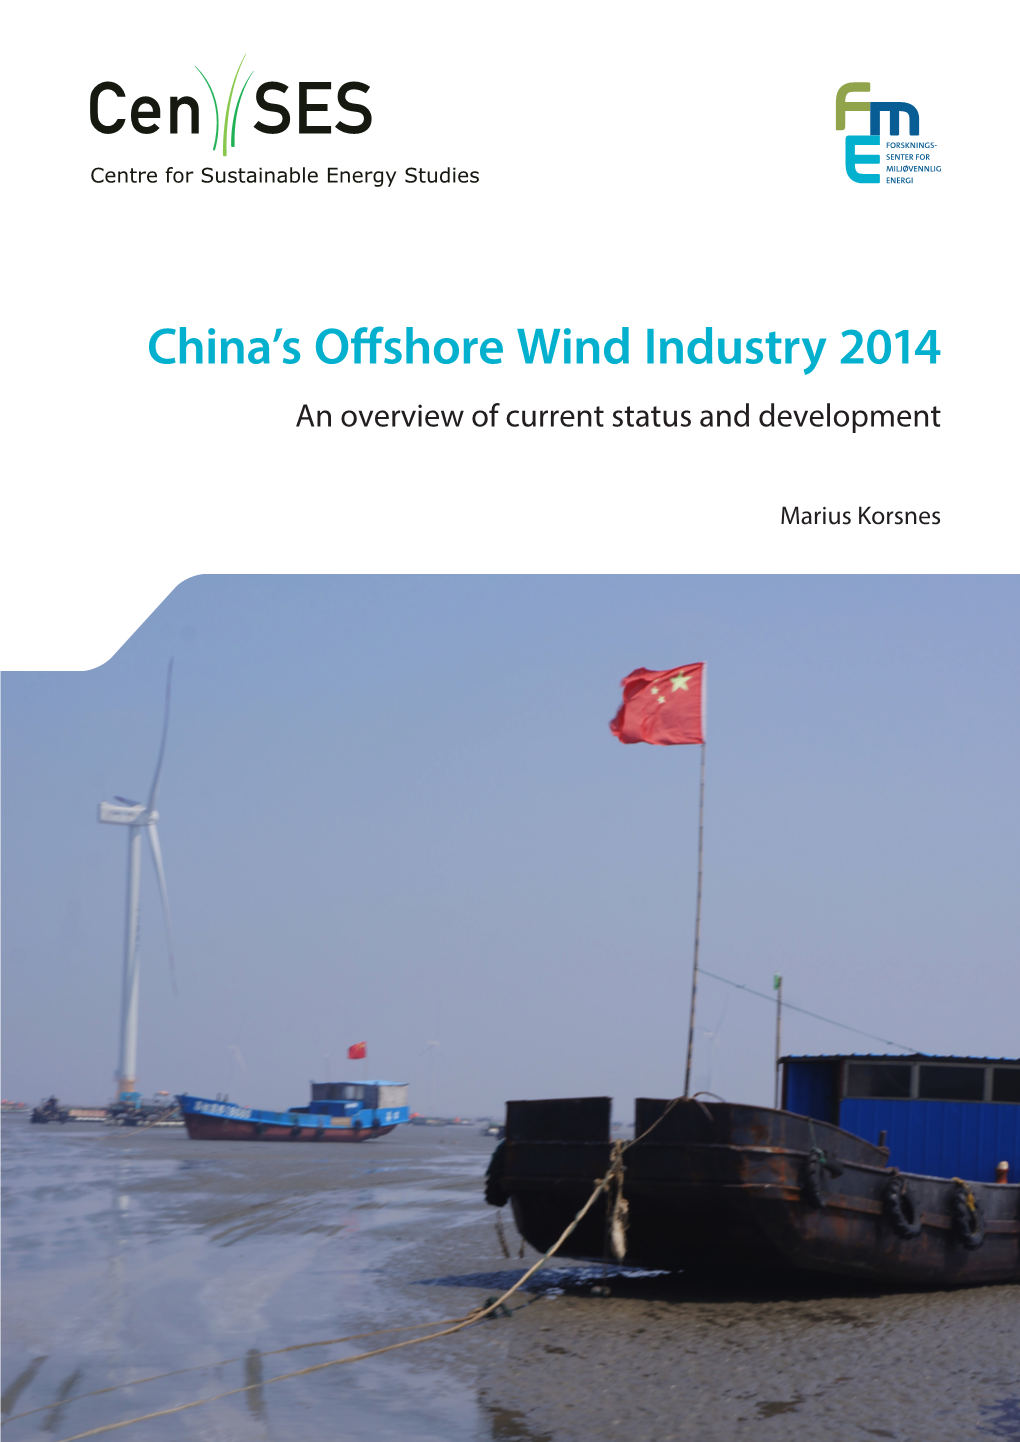 China's Offshore Wind Industry 2014